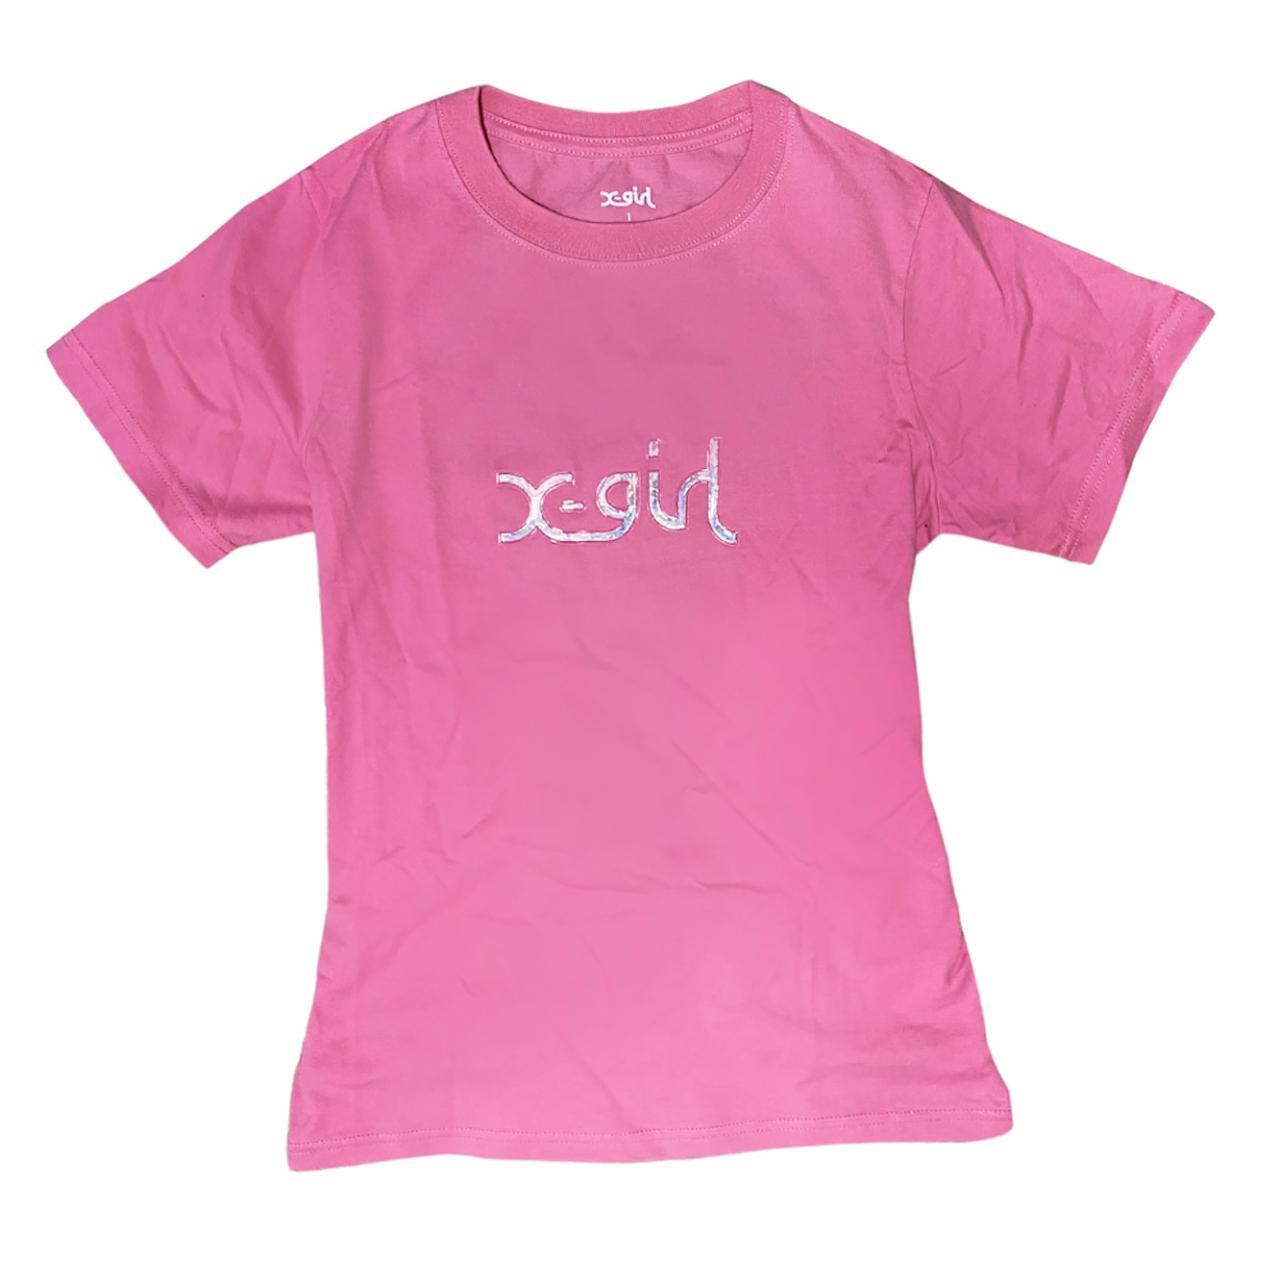 X-Girl  Women's Pink and Silver T-shirt